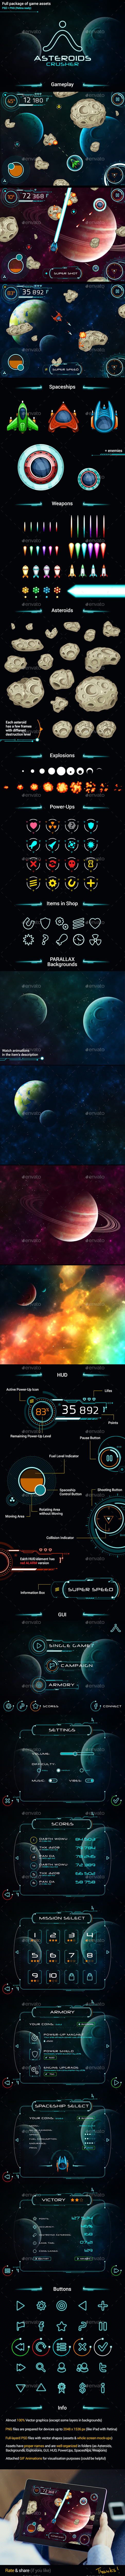 Graphics: 2d Alien Android Arcade Assets Asteroids Background Earth Explosion Galaxy Game Gui Hud Ipad Mobile Moon Parallax Planet Retina Rockets Scifi Set Shooter Space Spaceship Sprites Star Ufo Vector Weapon